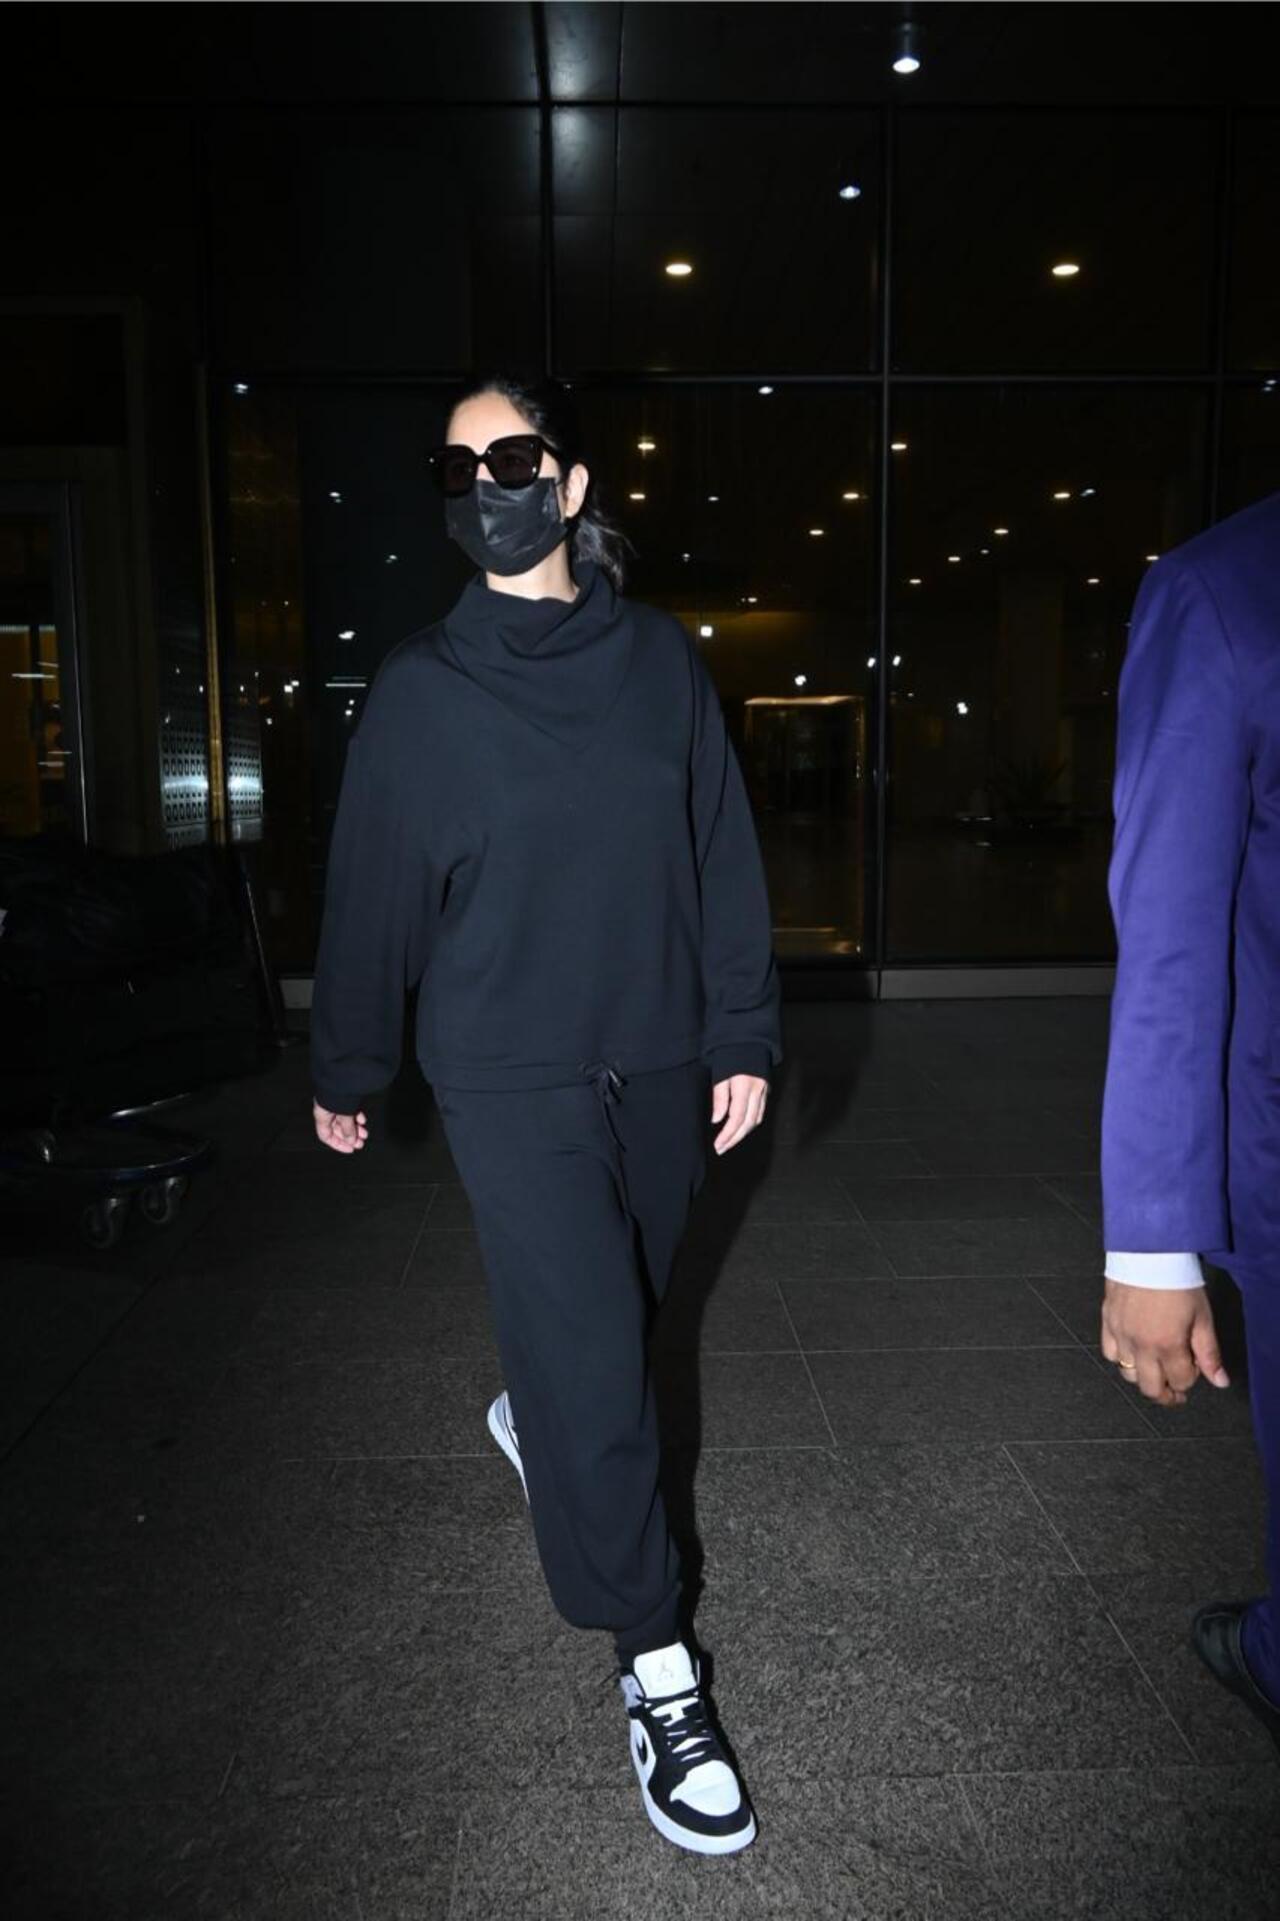 Queen Katrina Kaif opted for an all-black outfit as she was snapped at the airport